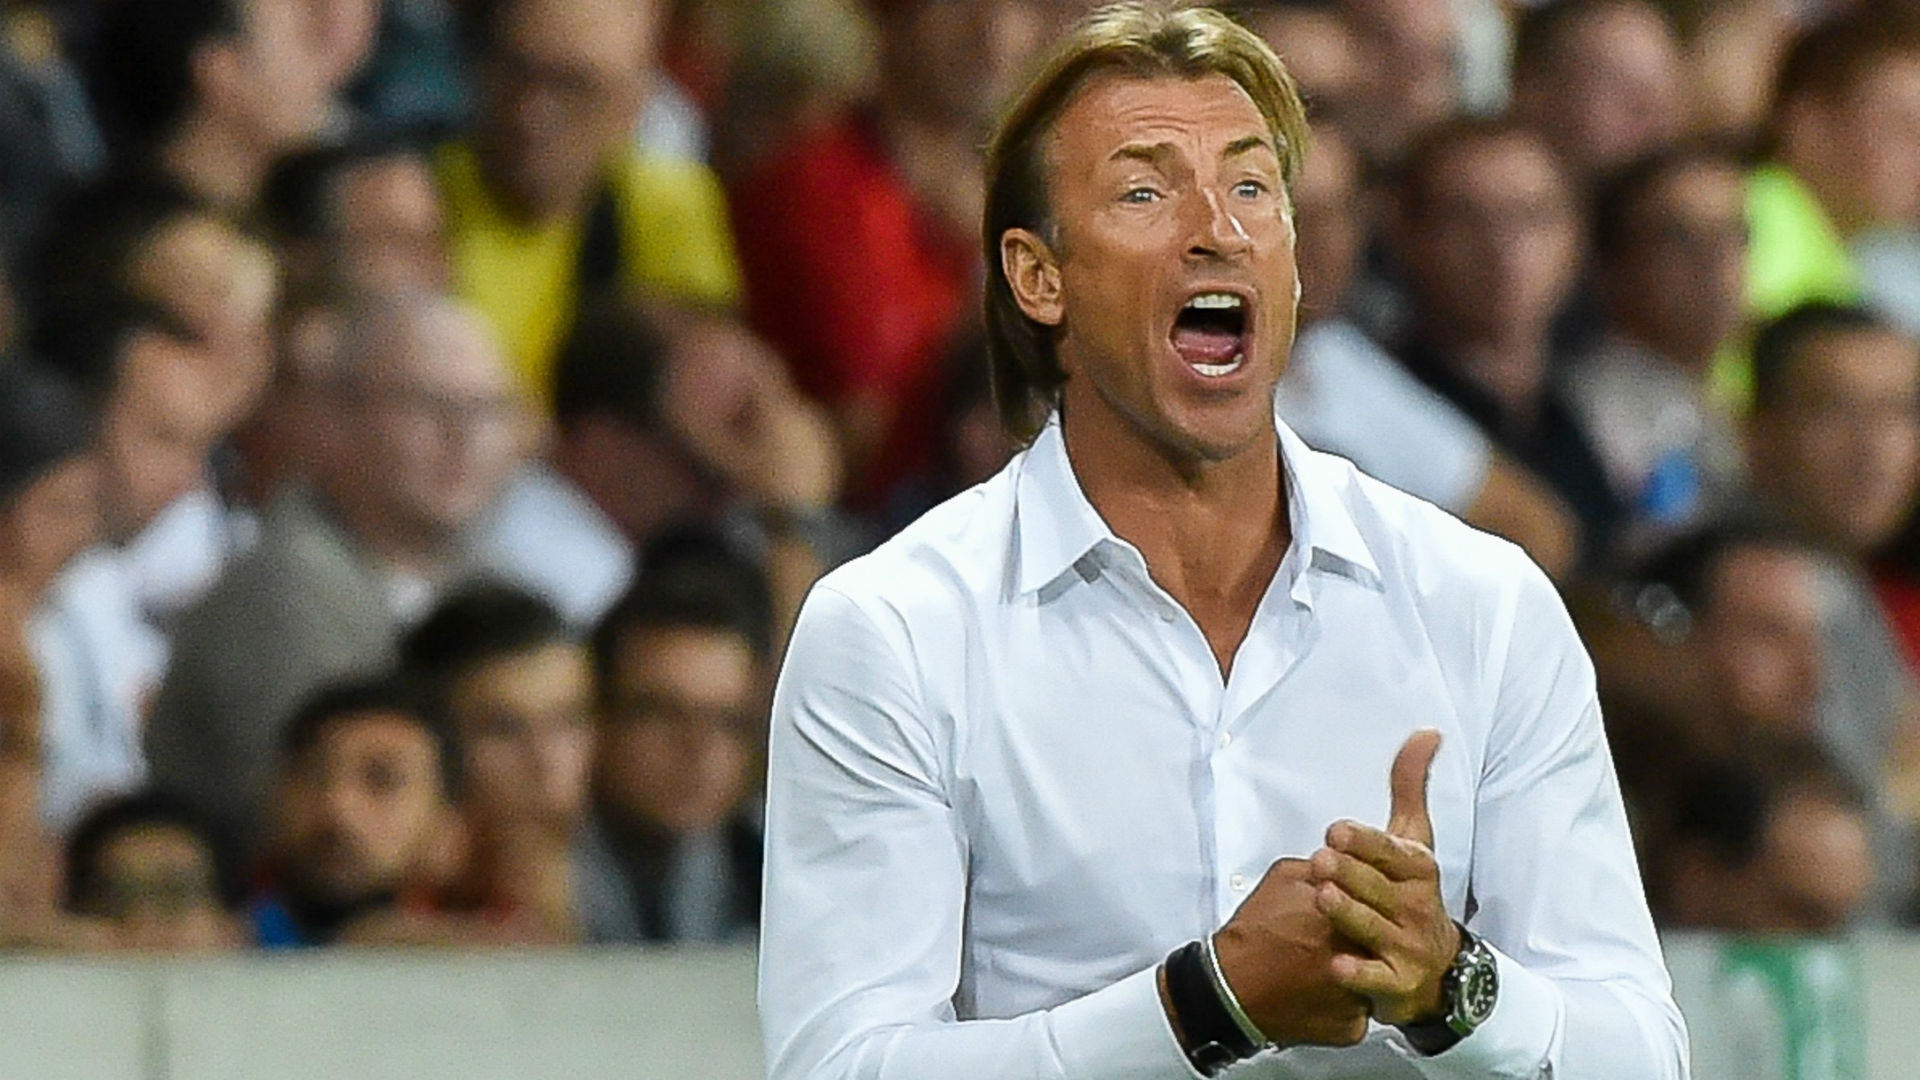 Afcon 2019: Morocco coach Herve Renard calls for togetherness ahead of Namibia clash